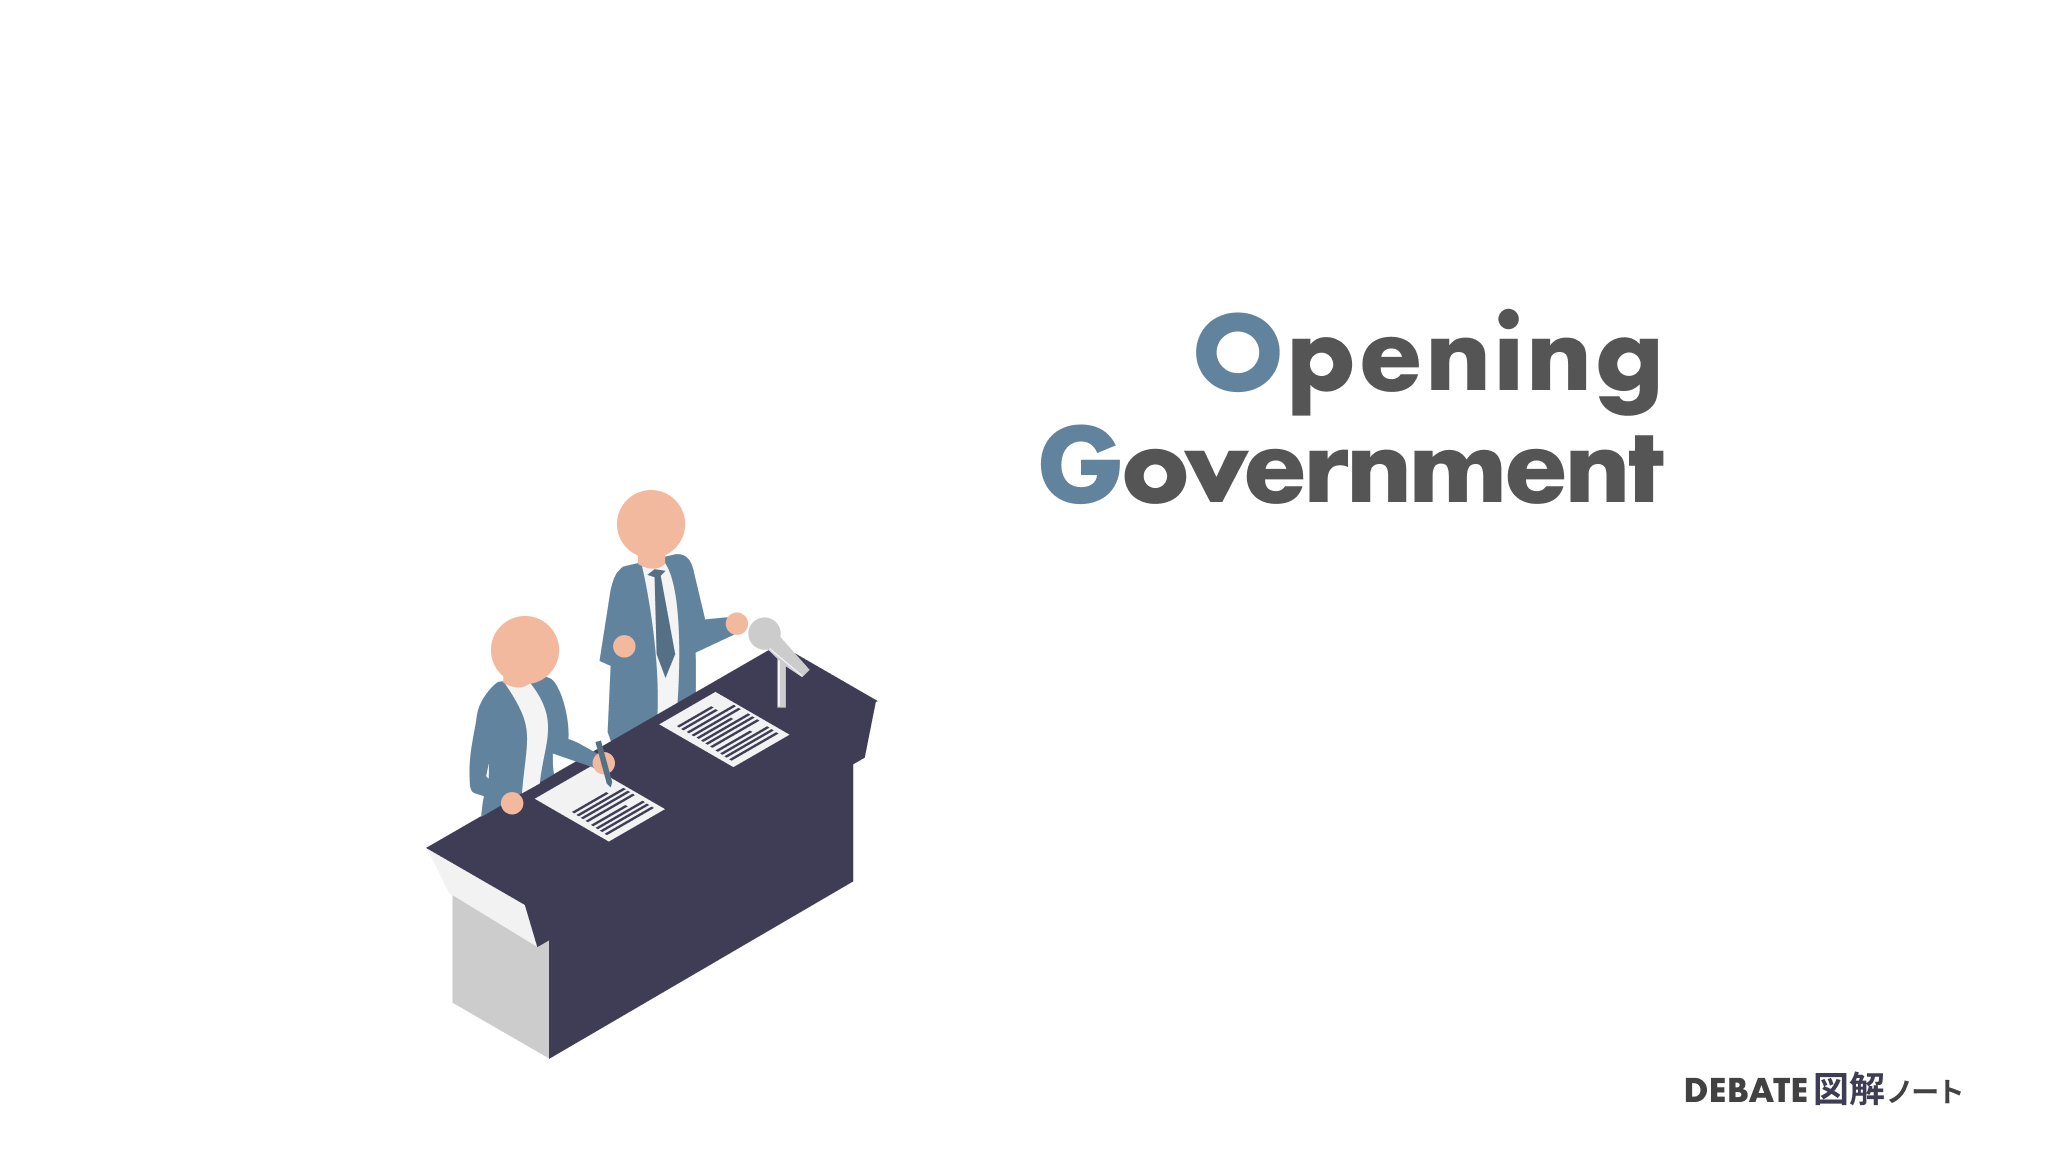 Opening Government (OG)